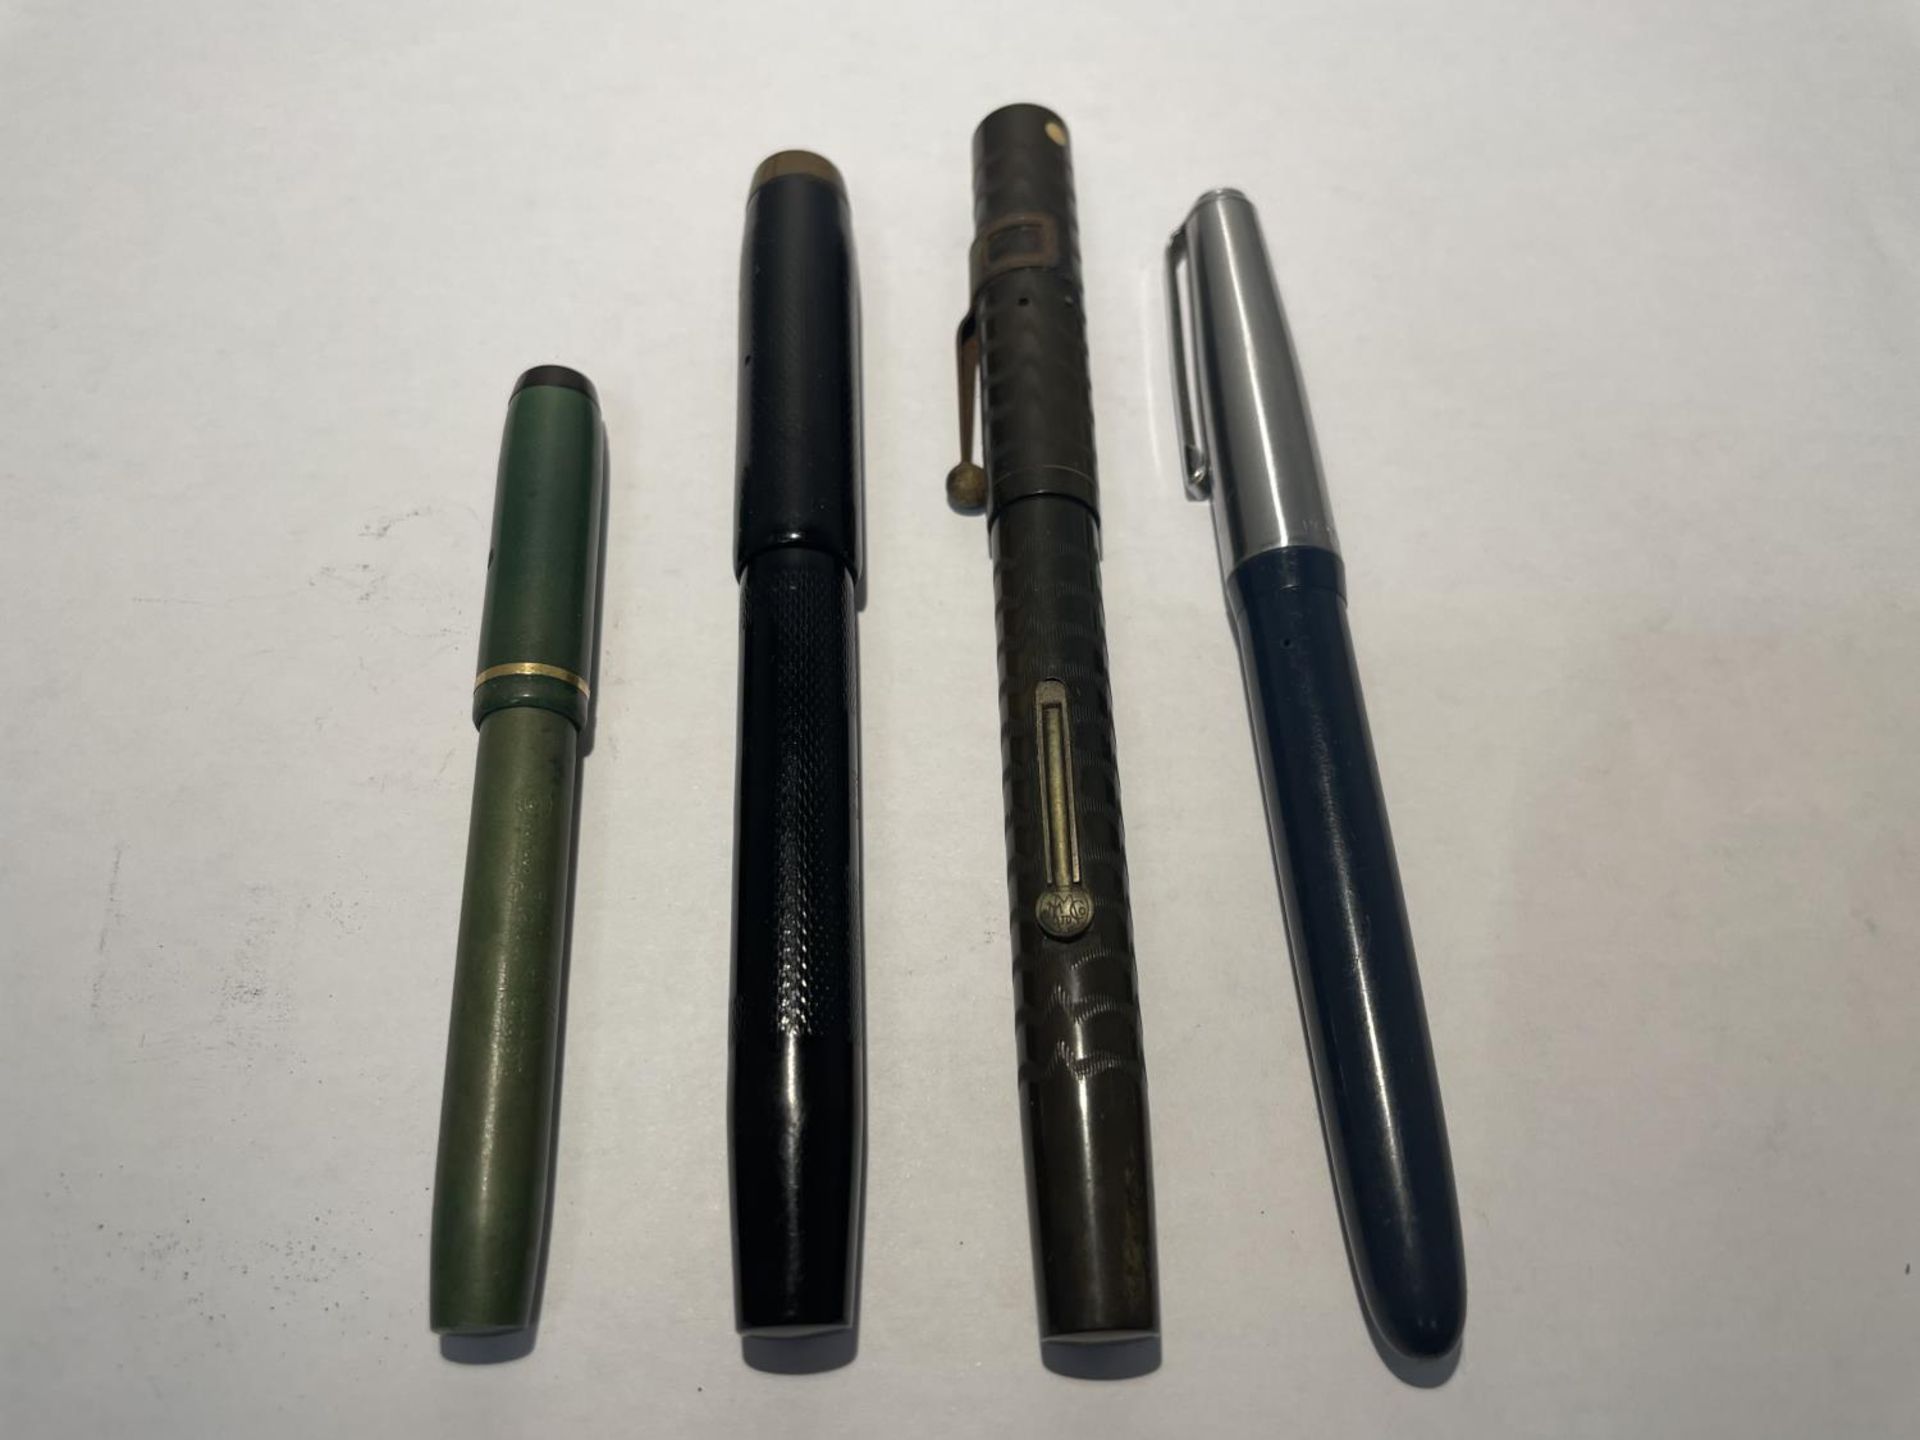 FOUR VINTAGE FOUNTAIN PENS WITH 14 CARAT GOLD NIBS - A COMBRIDGE NO 2, A CONWAY STEWART, A SPOT